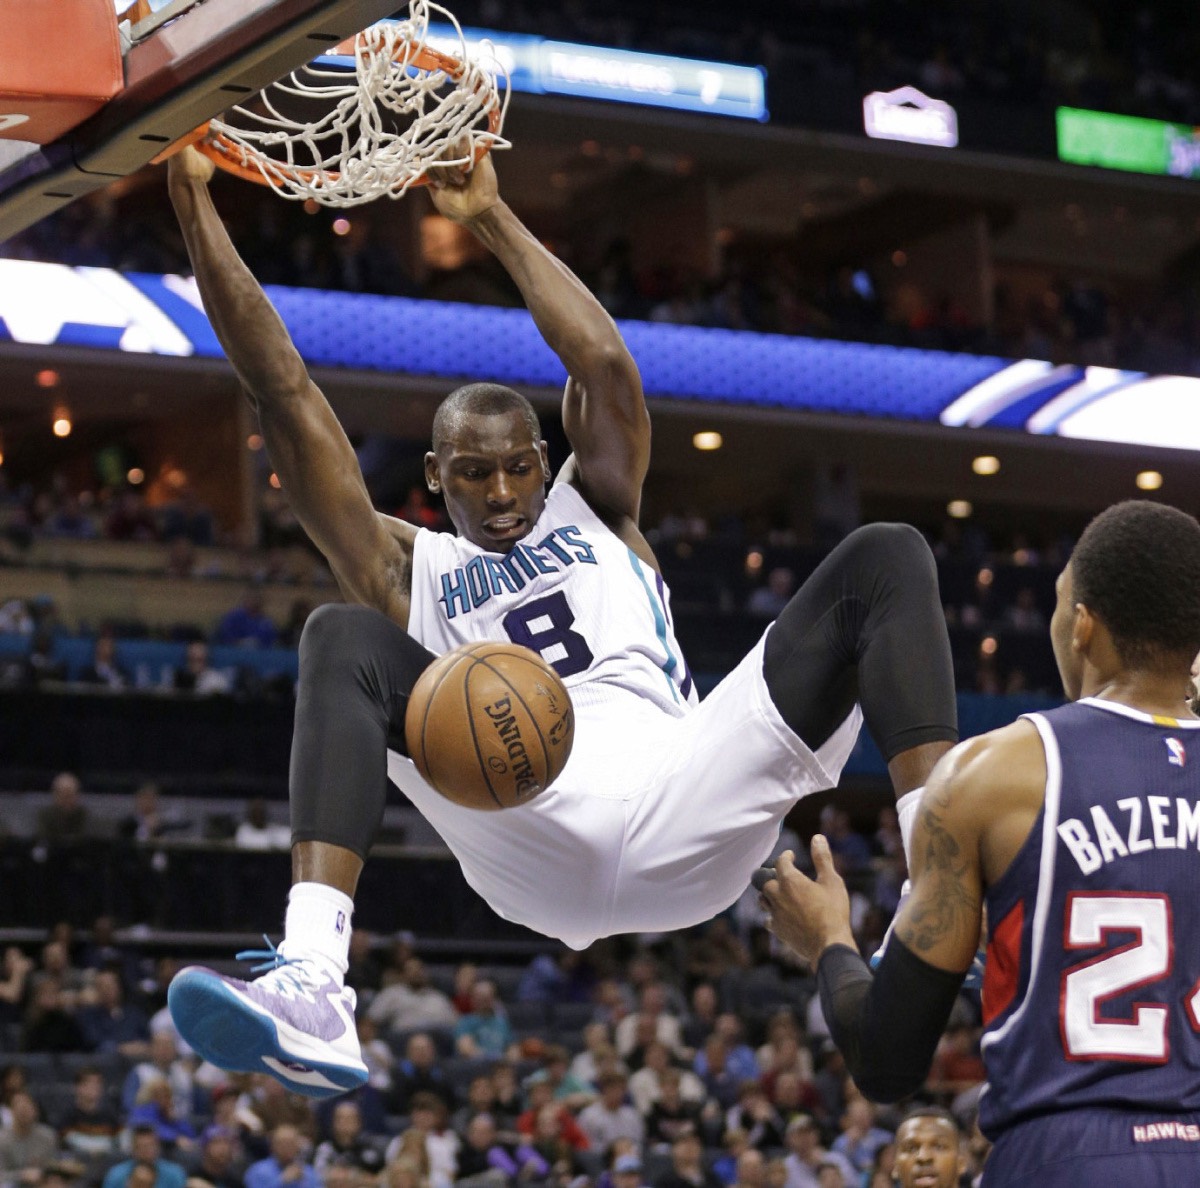 Charlotte Hornets' Bismack Biyombo (8) dunks against Atlanta Hawks' Kent Bazemore, right, during the second half of an NBA basketball game in Charlotte, N.C., Saturday, March 28, 2015. The Hornets won 115-100. | AP P/Chuck Burton